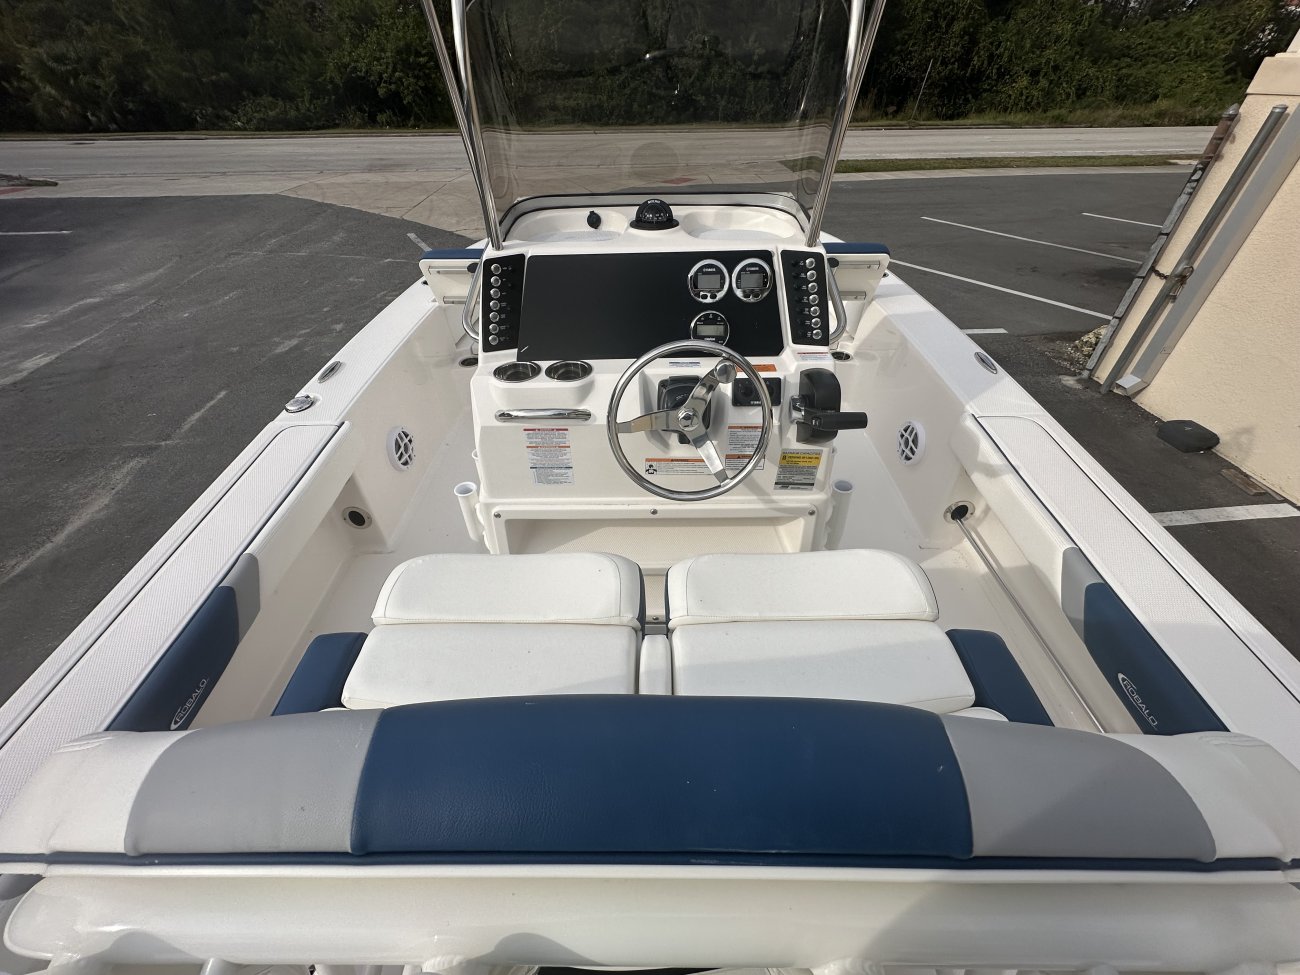 A 226 Cayman Bay Boat is a Power and could be classed as a Bass Boat, Bay Boat, Center Console, Fish and Ski, Flats Boat, Freshwater Fishing, High Performance, Saltwater Fishing, Runabout,  or, just an overall Great Boat!